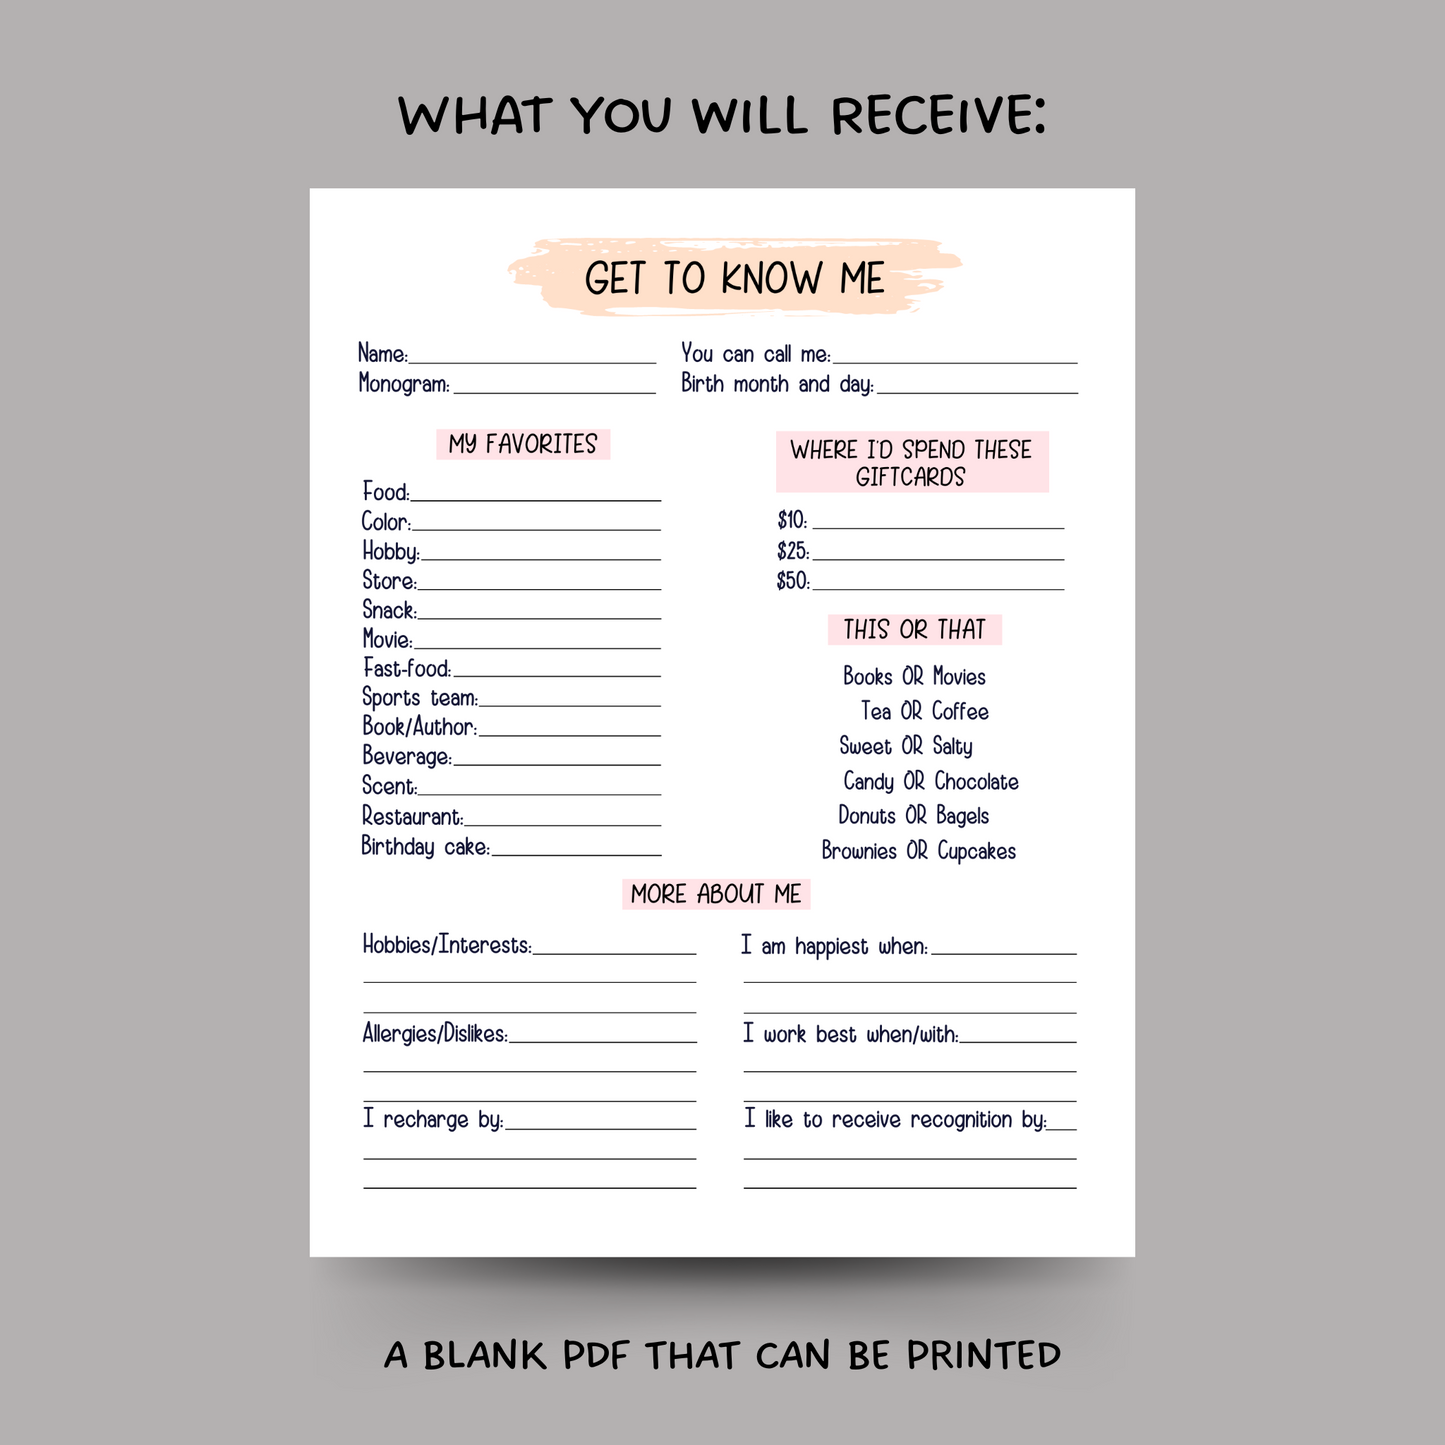 Coworker Questions Printable, All About Me Employee Survey